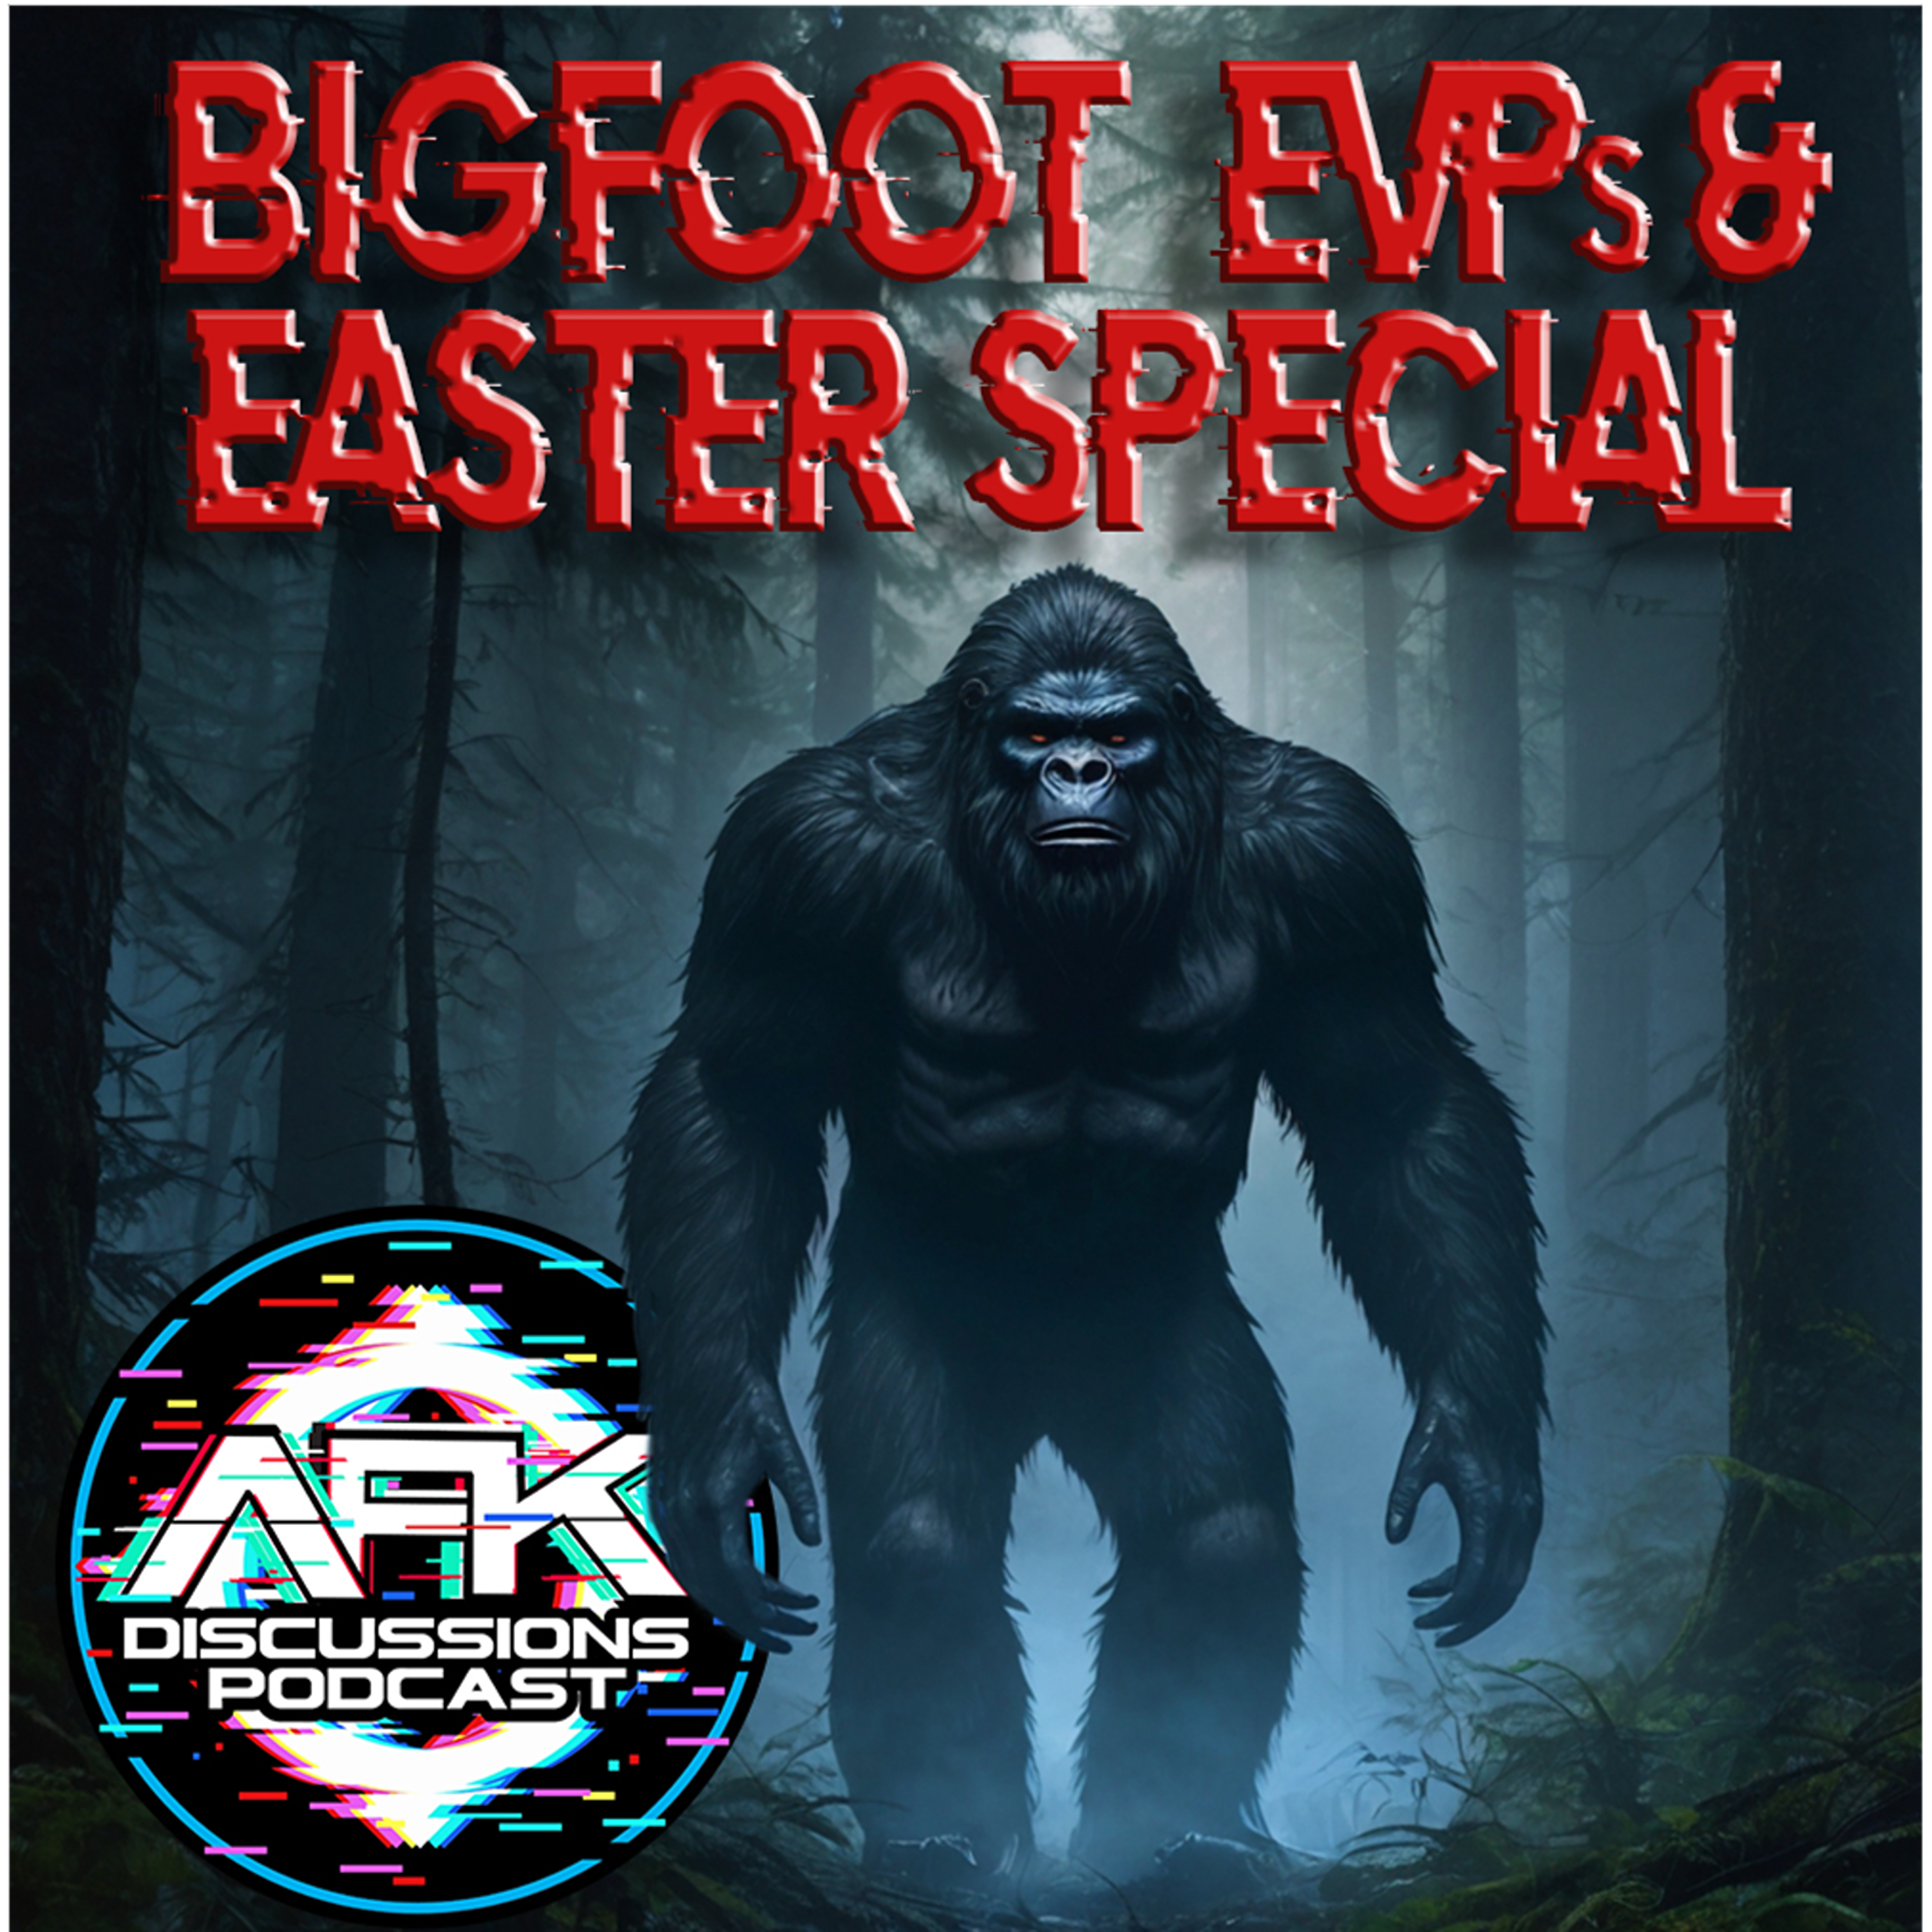 Bigfoot, EVPs, and Easter special